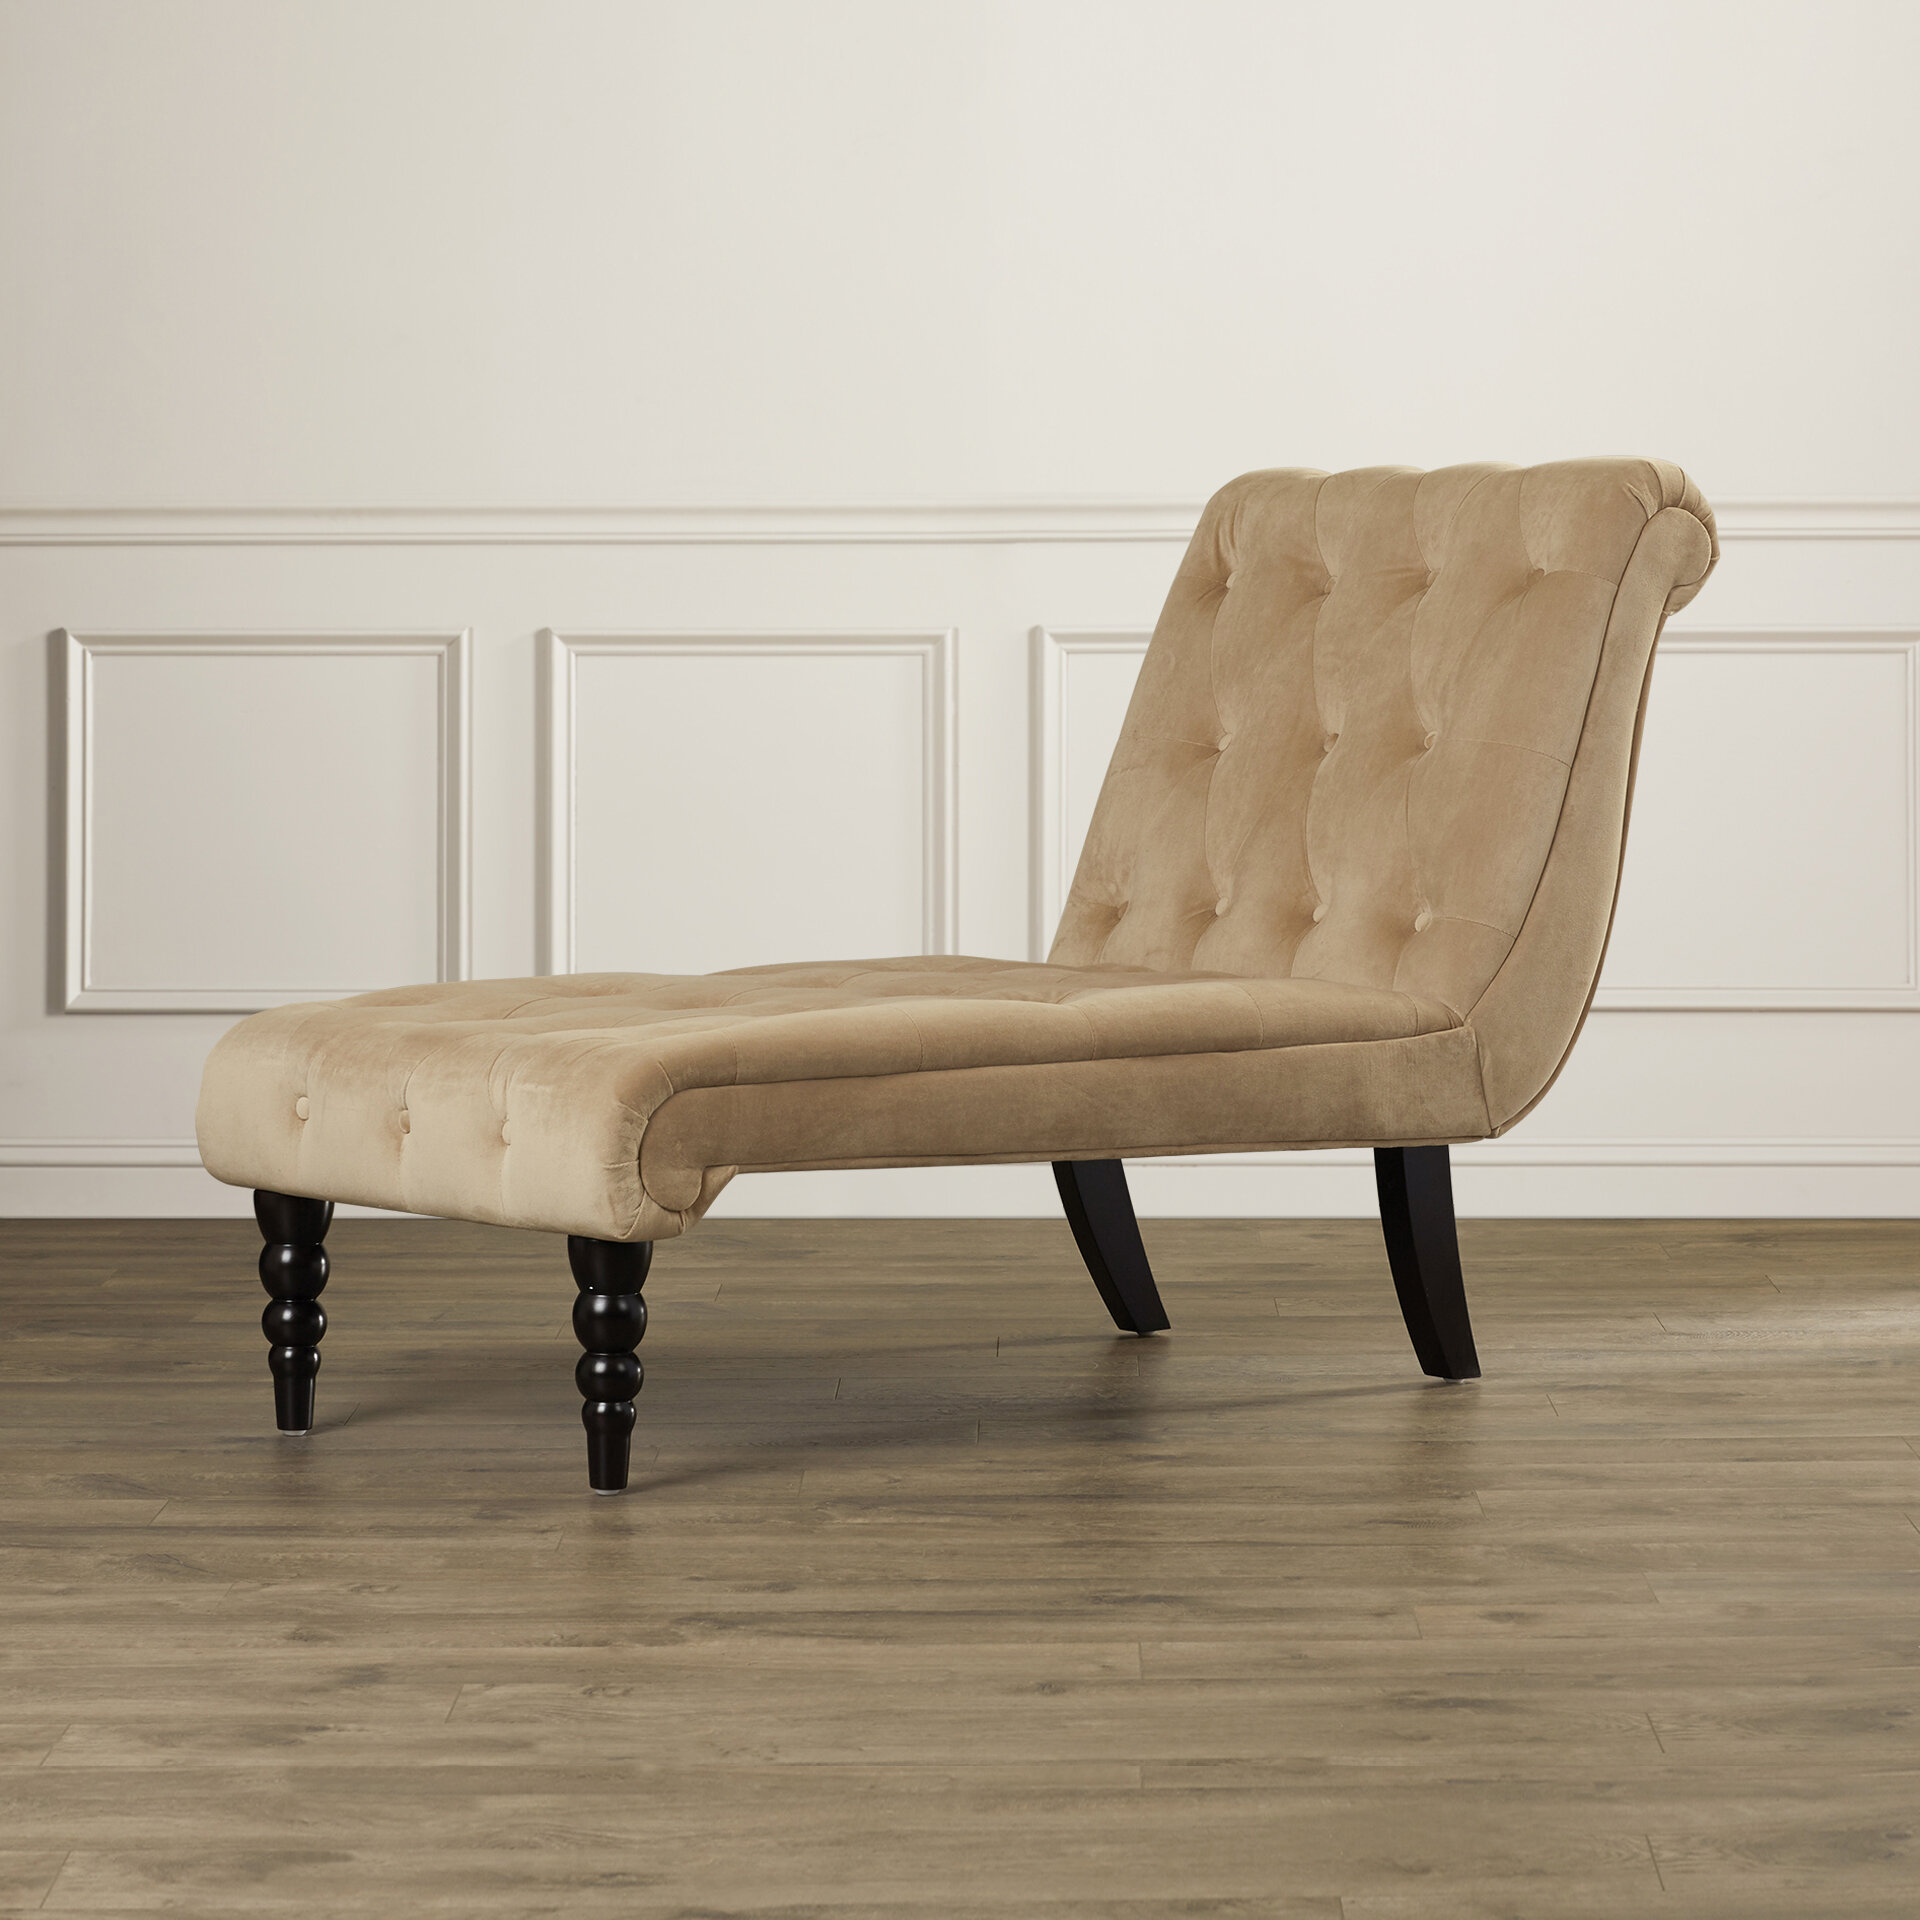 Rosemead Upholstered Chaise Lounge